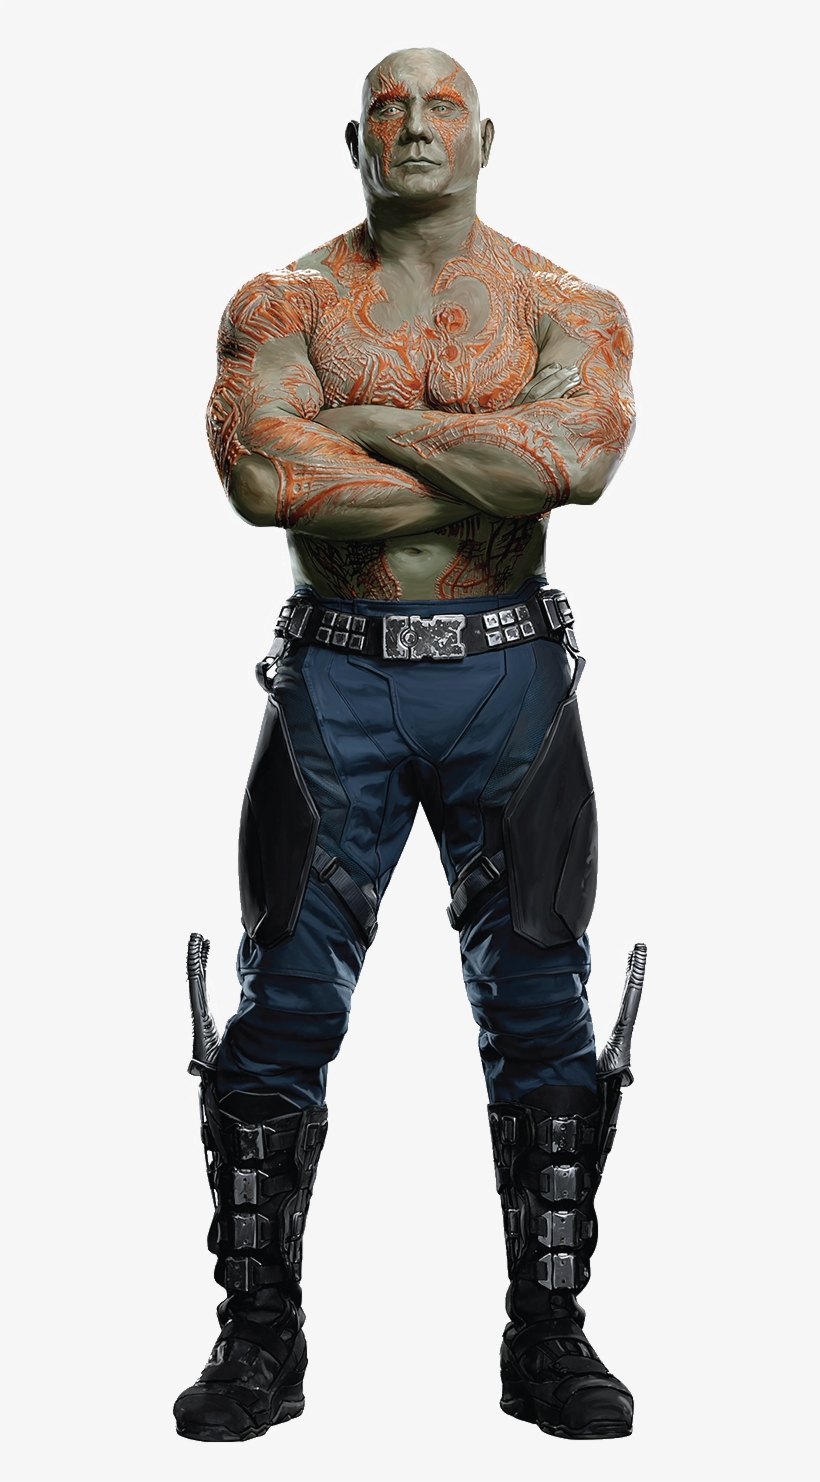 Guardians Of The Galaxy Vol 2 Png Image Royalty Free - Drax Guardians Of The Galaxy Costume, transparent png #1823245